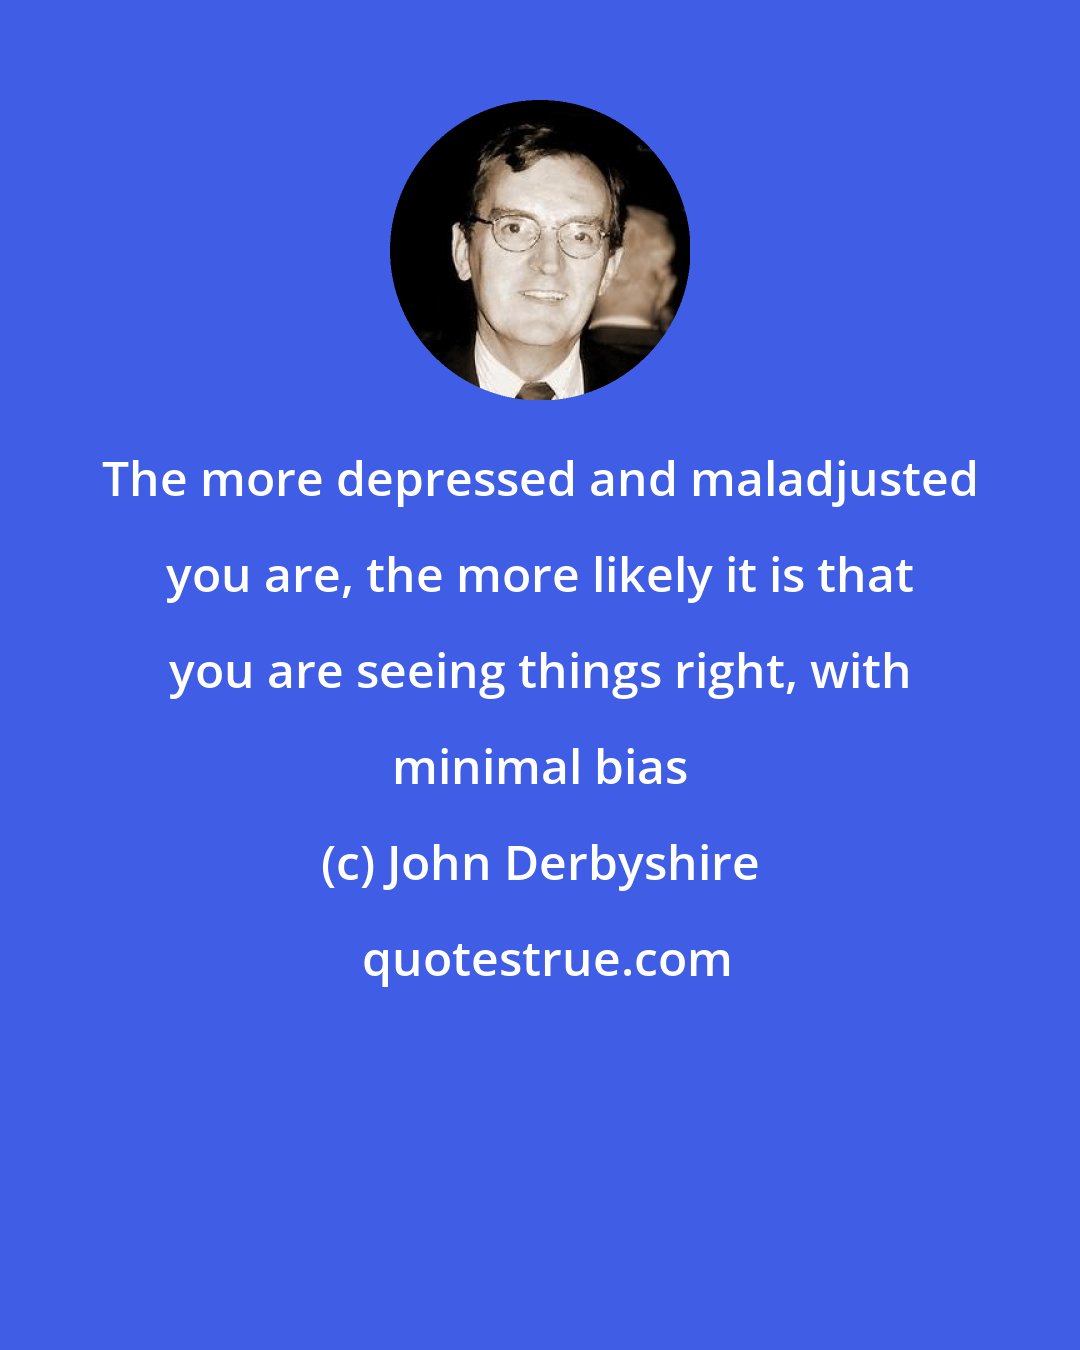 John Derbyshire: The more depressed and maladjusted you are, the more likely it is that you are seeing things right, with minimal bias